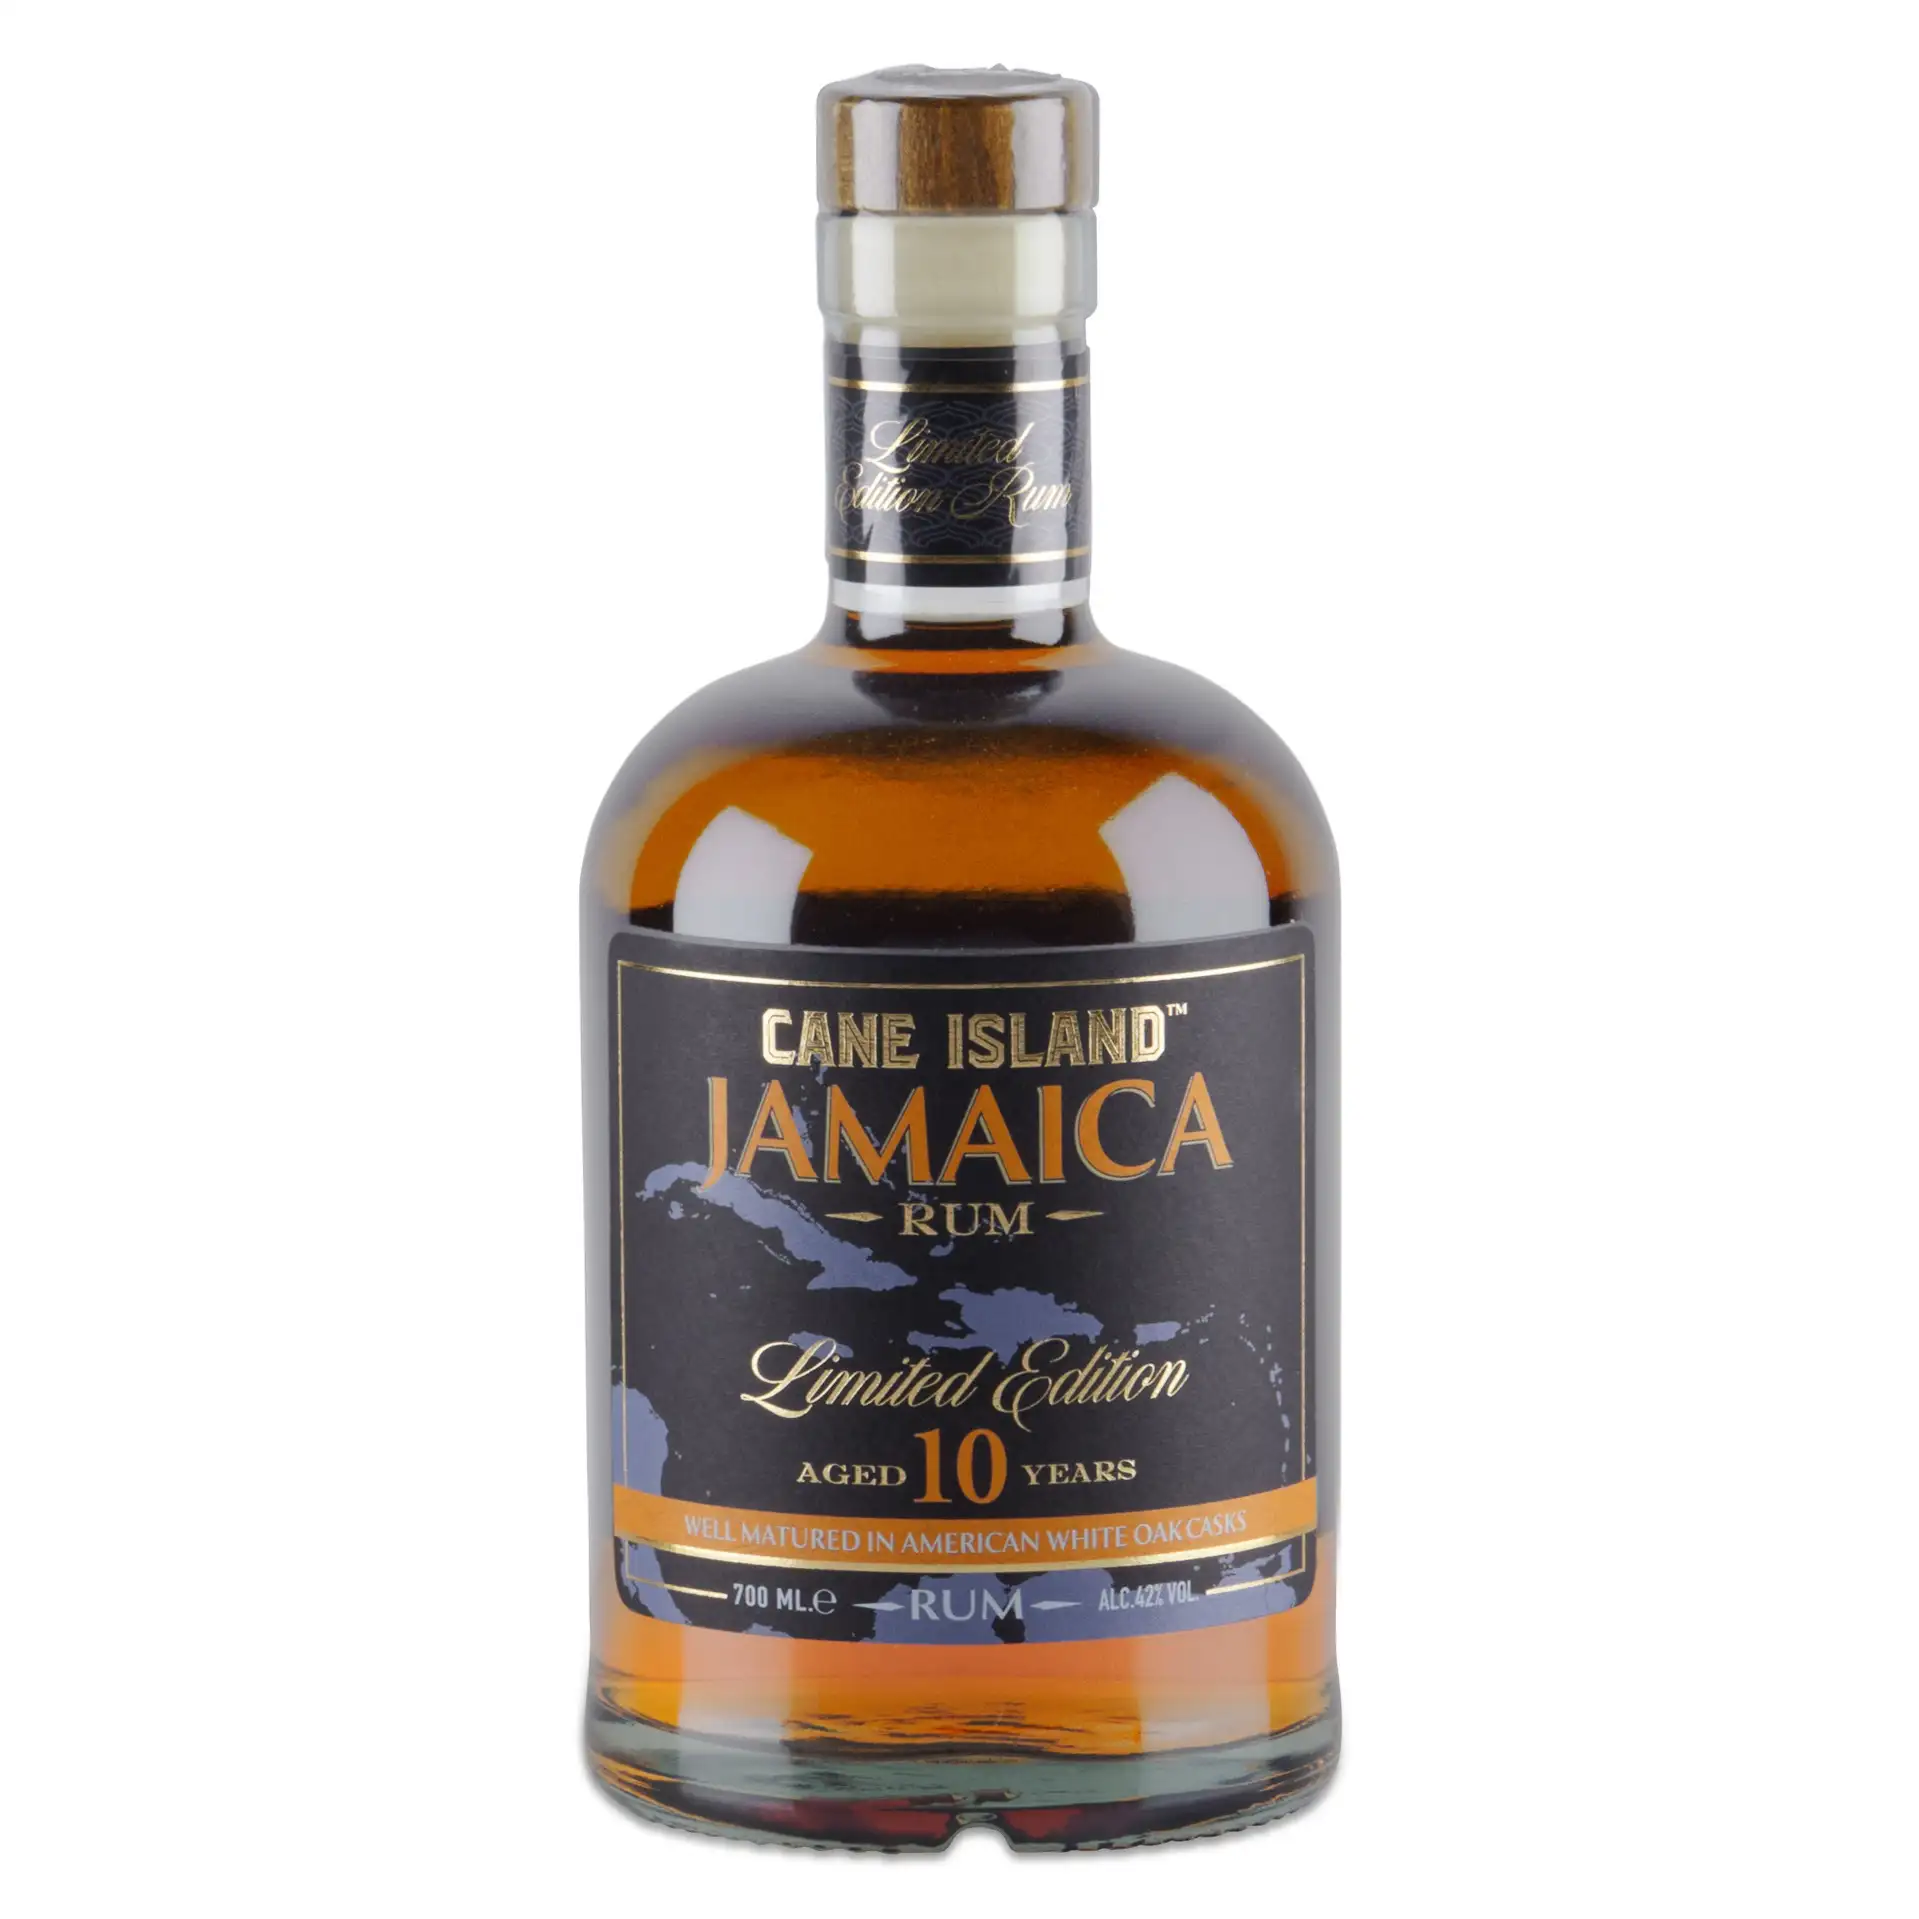 Image of the front of the bottle of the rum Jamaica Limited Edition